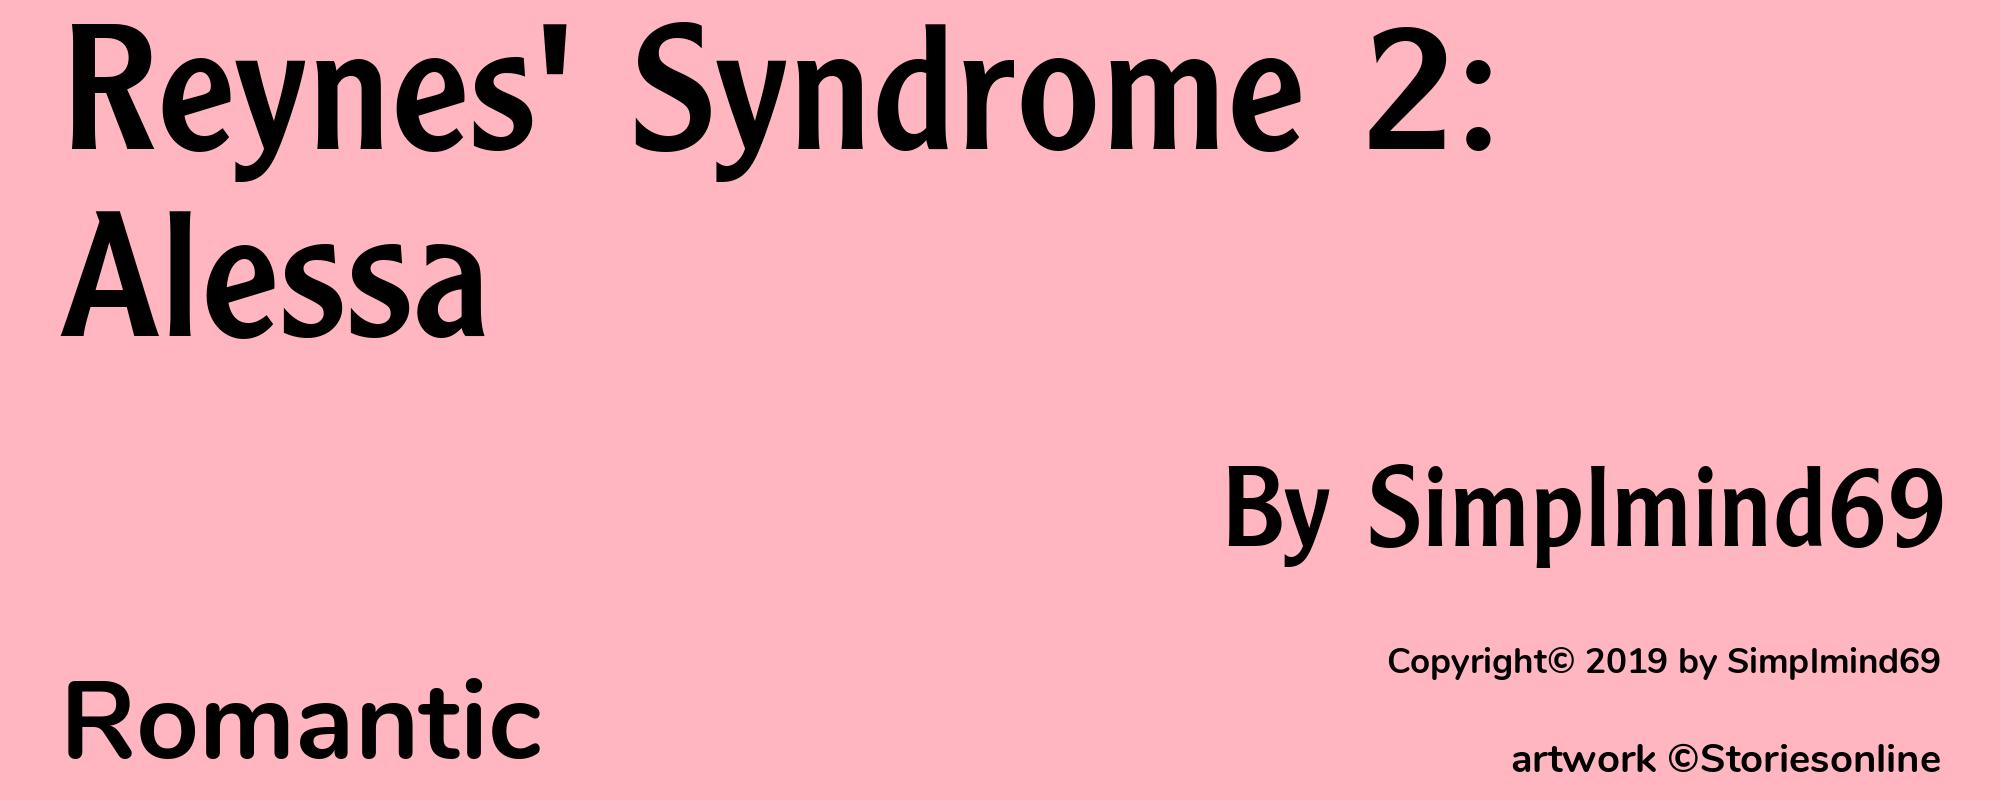 Reynes' Syndrome 2: Alessa - Cover